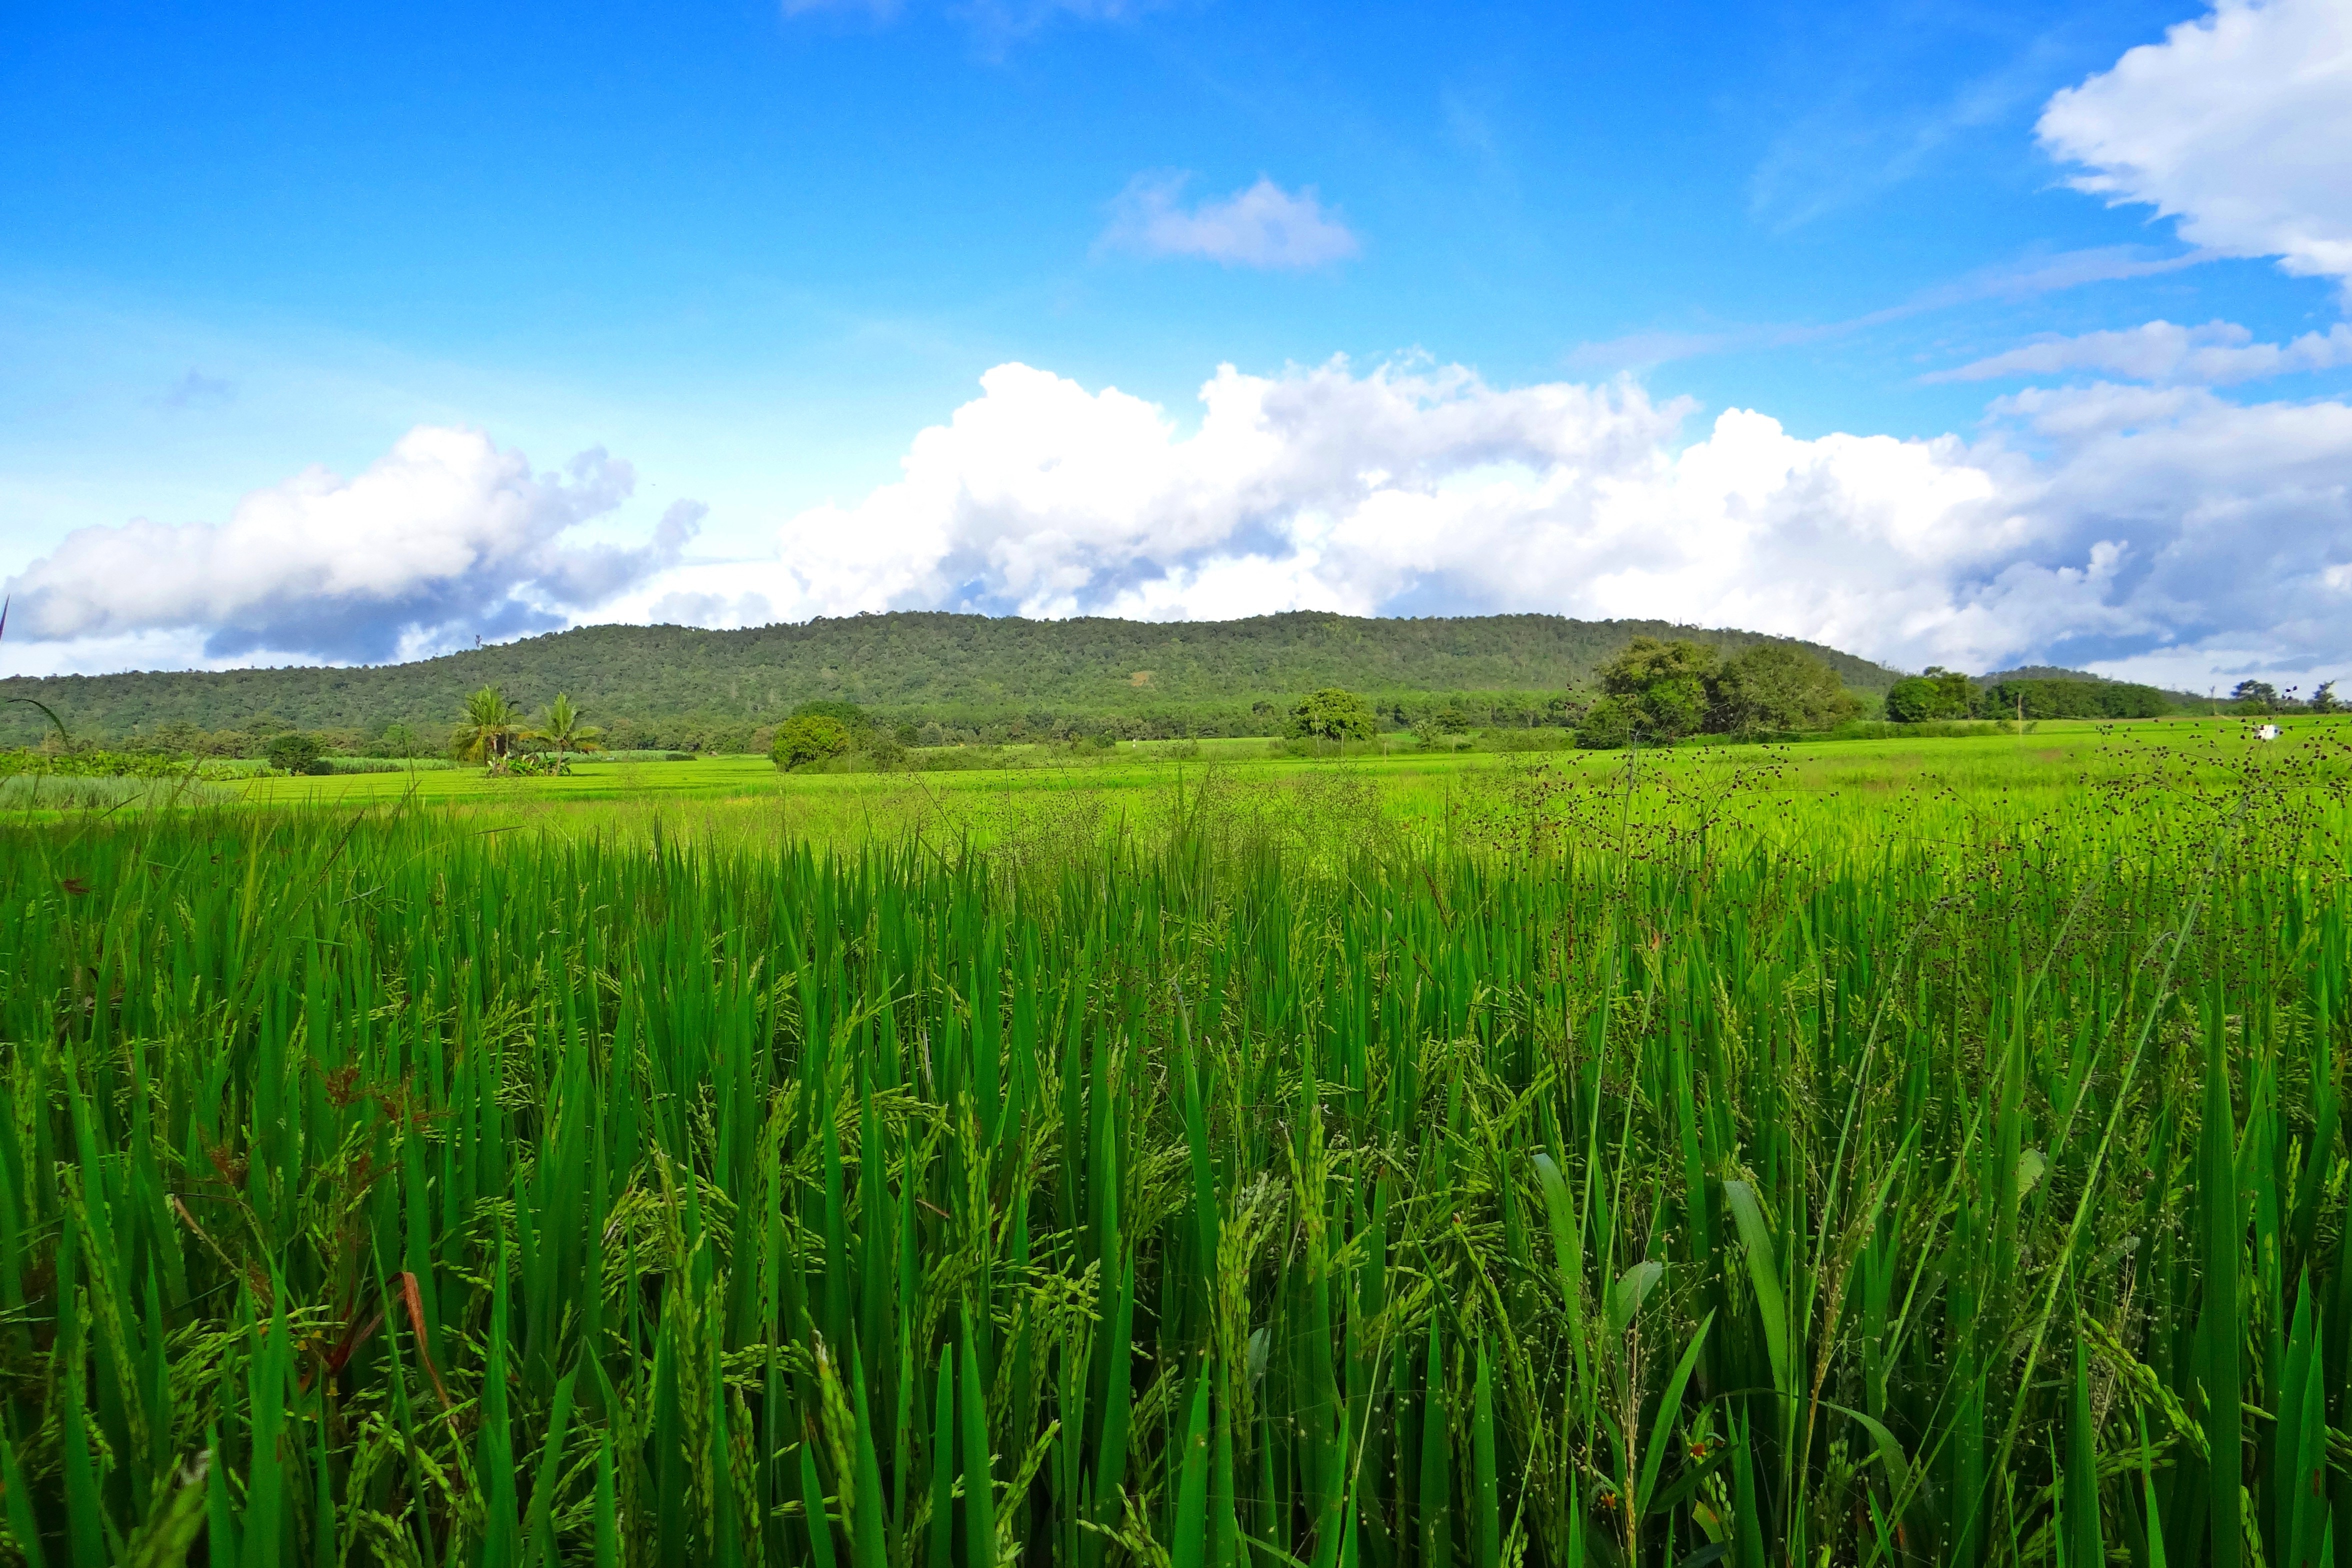 Fields, Paddy, Crops, Greenery, Rice, field, agriculture